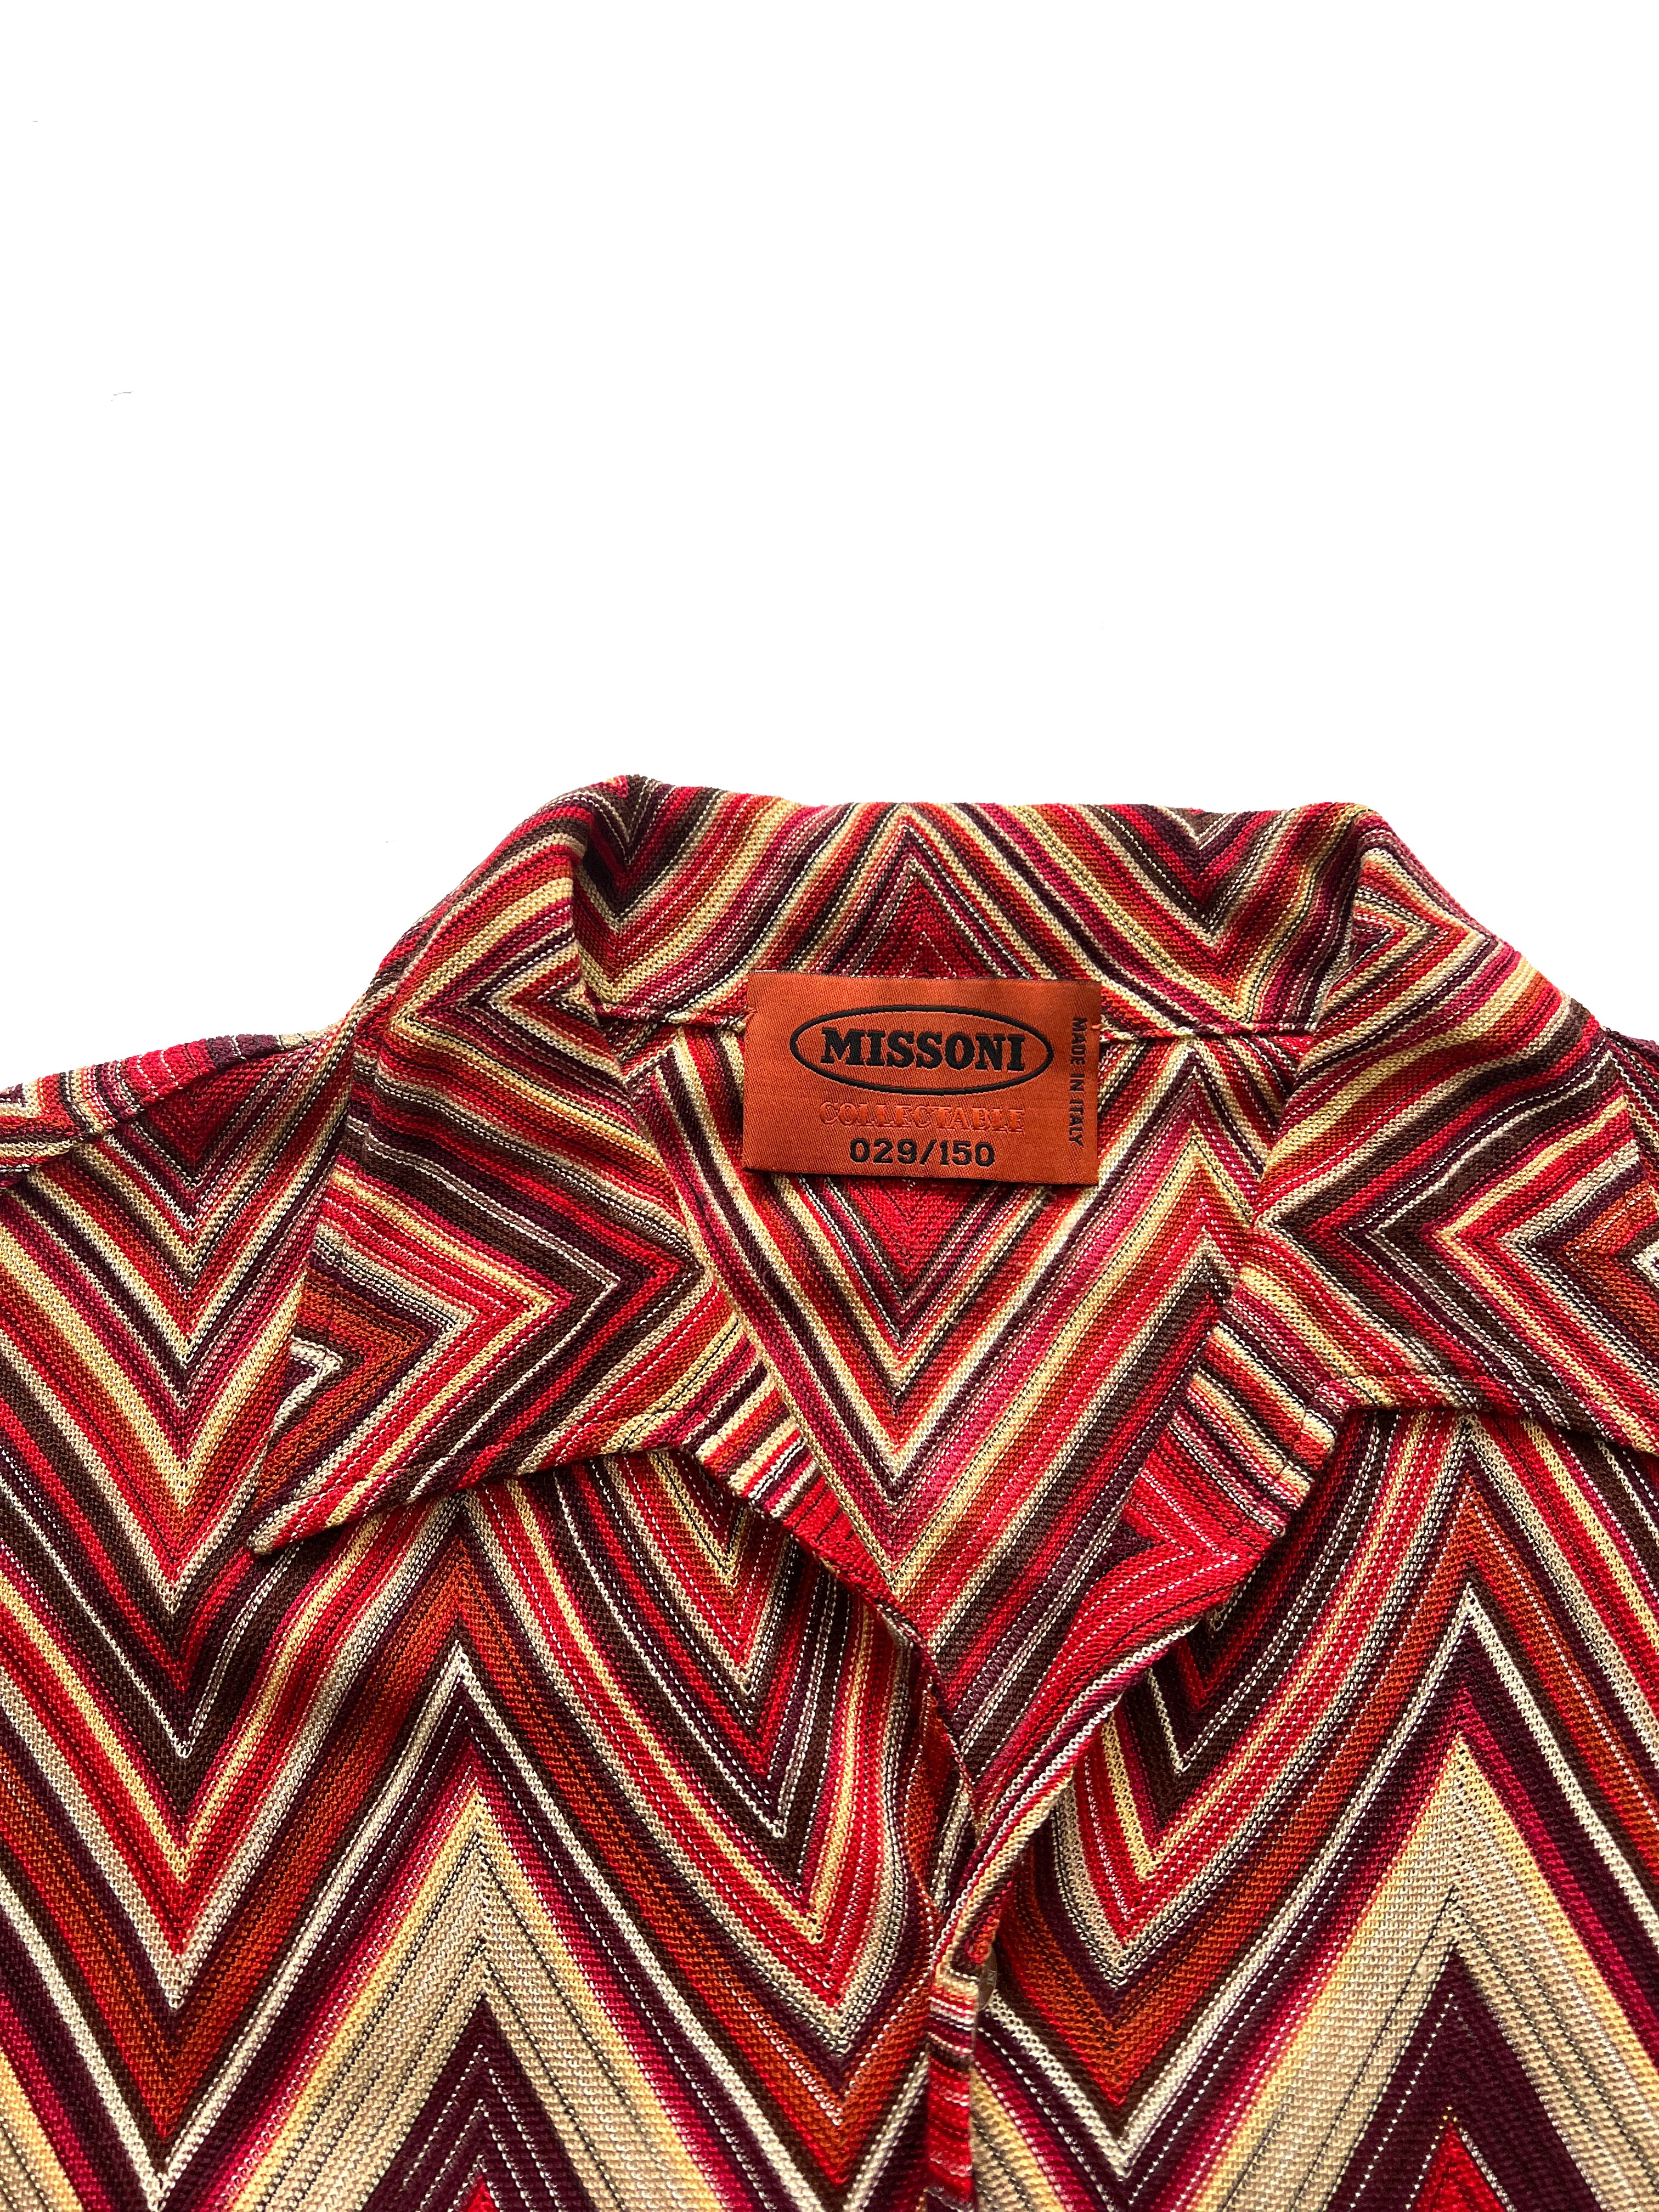 Missoni Textured Shirt 90's (Only 150 ever made)